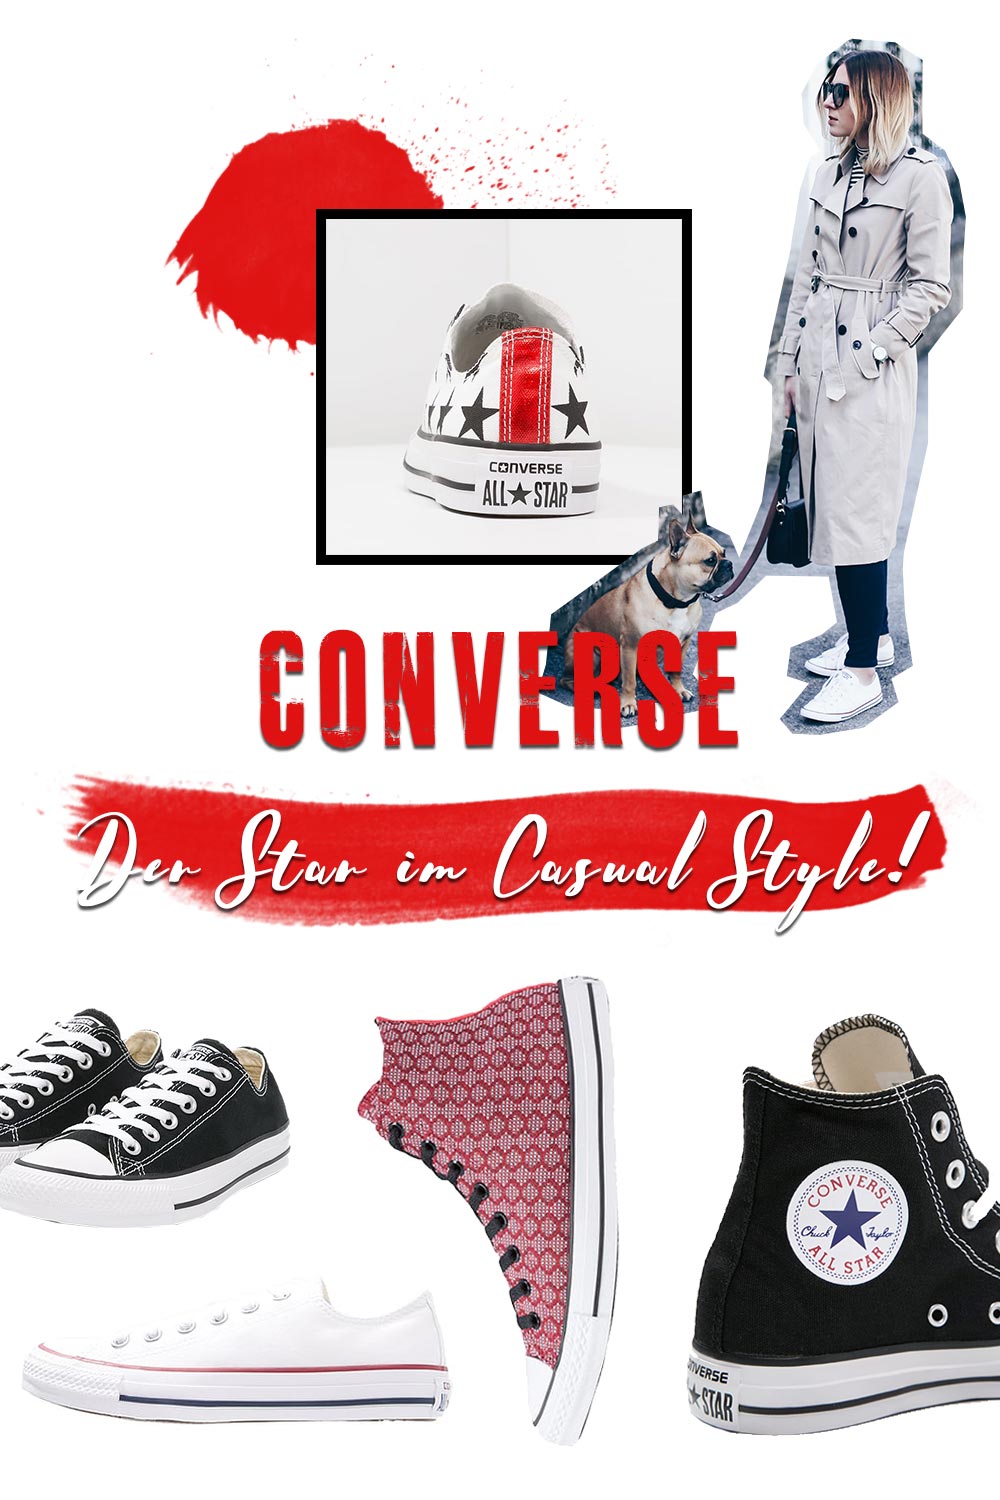 how to wear Converse, Chucks kombinieren und stylen, Shoe of the Month, Converse Outfit, Chucks Look, Style Blog, Fashion Blog, Modeblog, Outfit Blog, Outfit Ideen, www.whoismocca.com